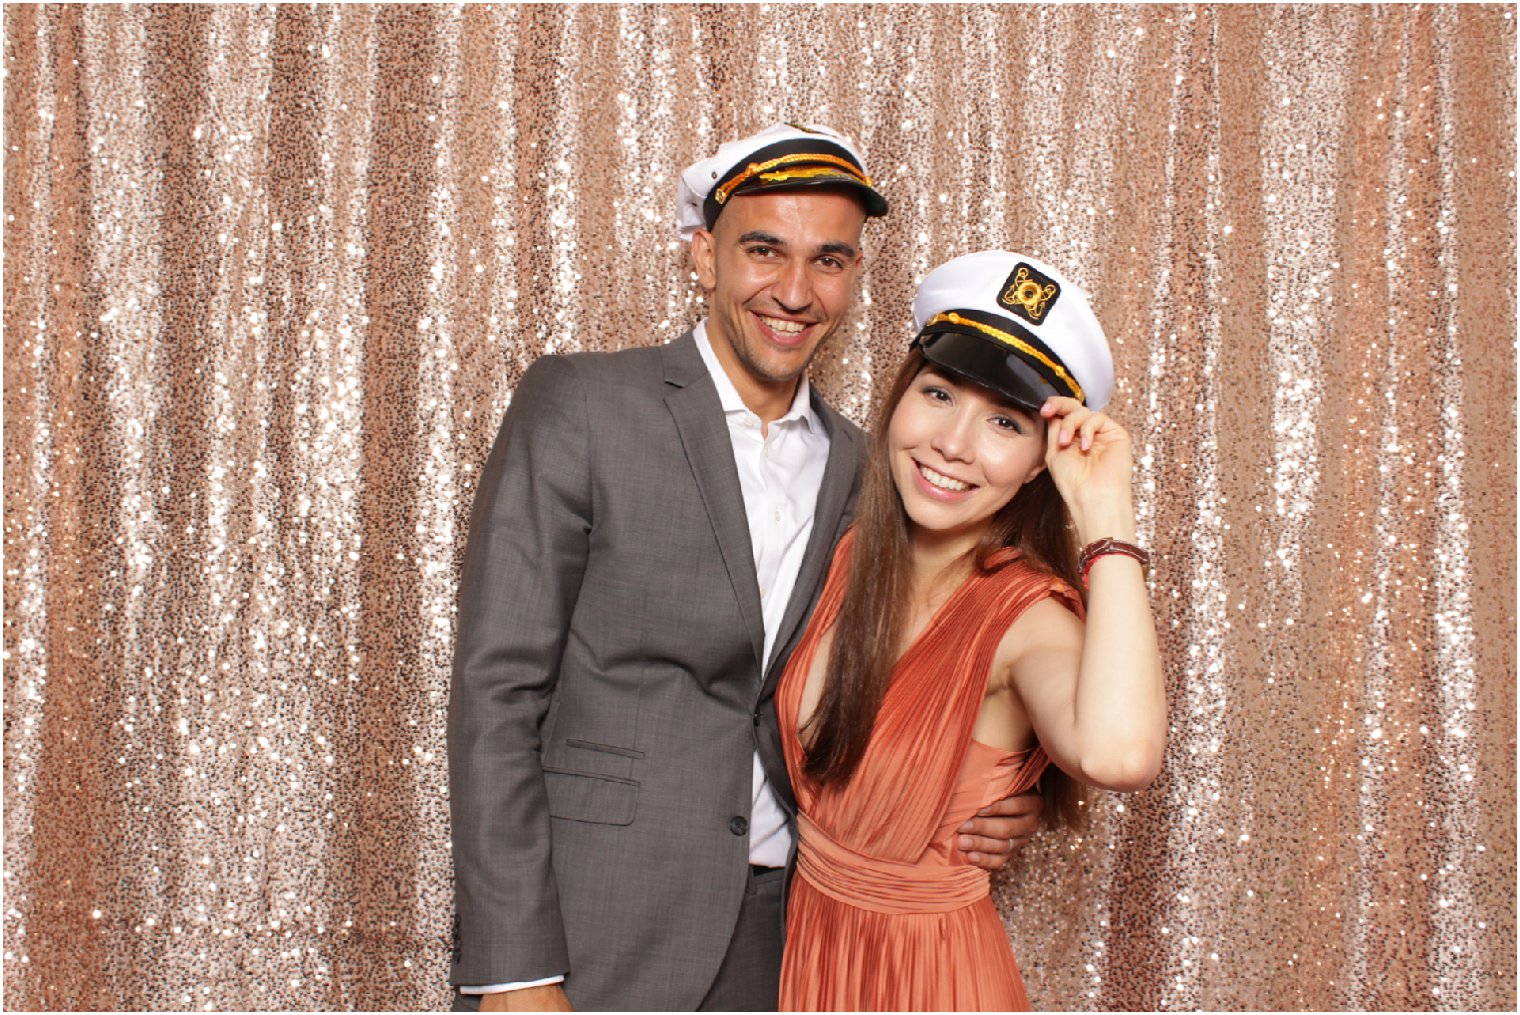 Photo booth with sailors hats